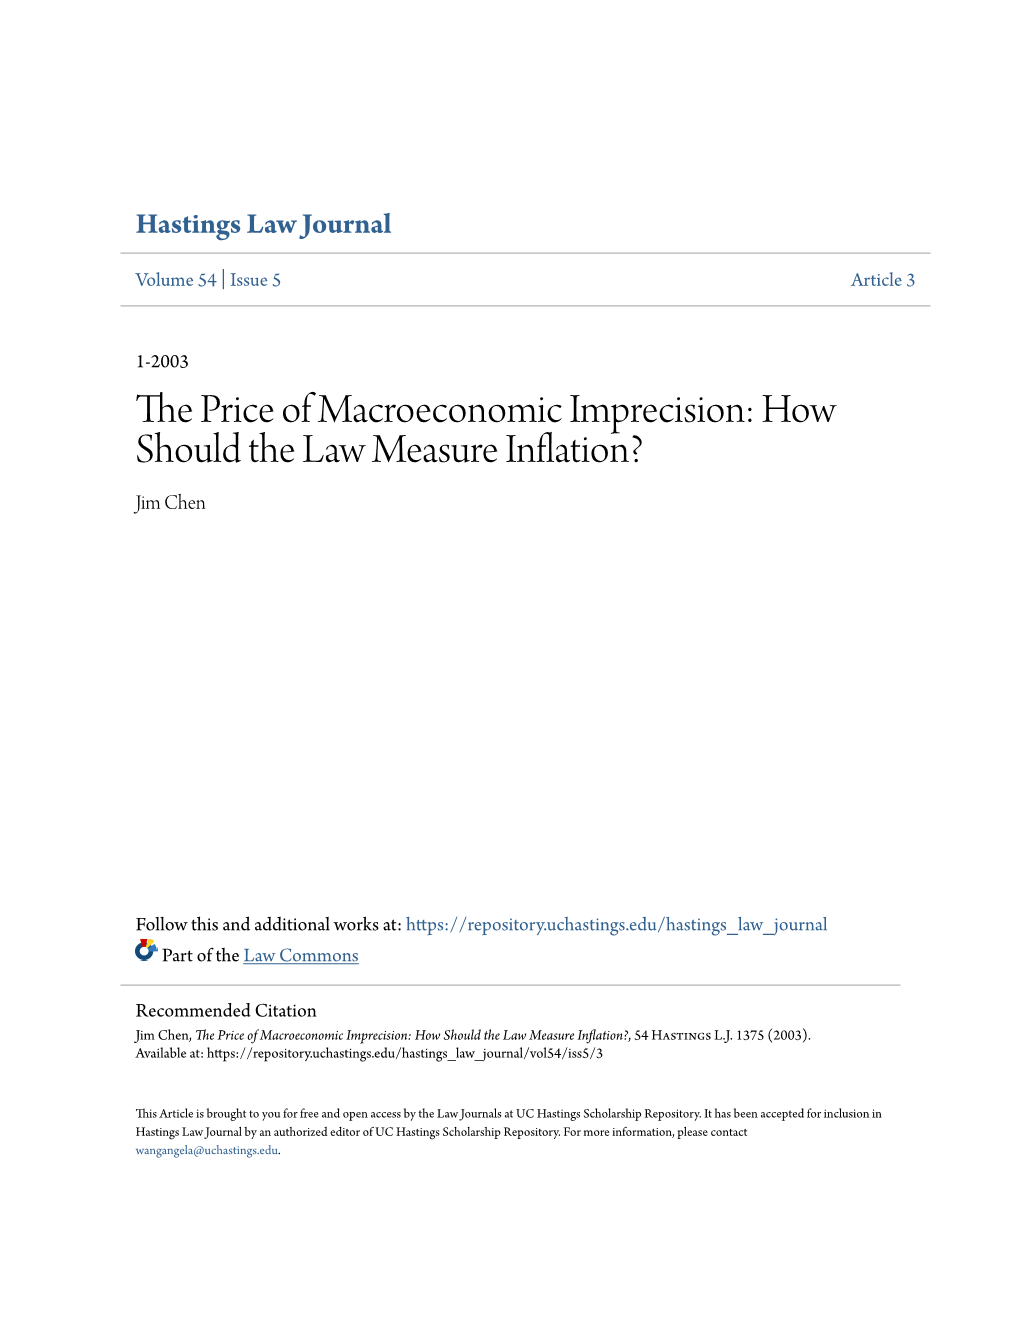 The Price of Macroeconomic Imprecision: How Should the Law Measure Inflation?, 54 Hastings L.J